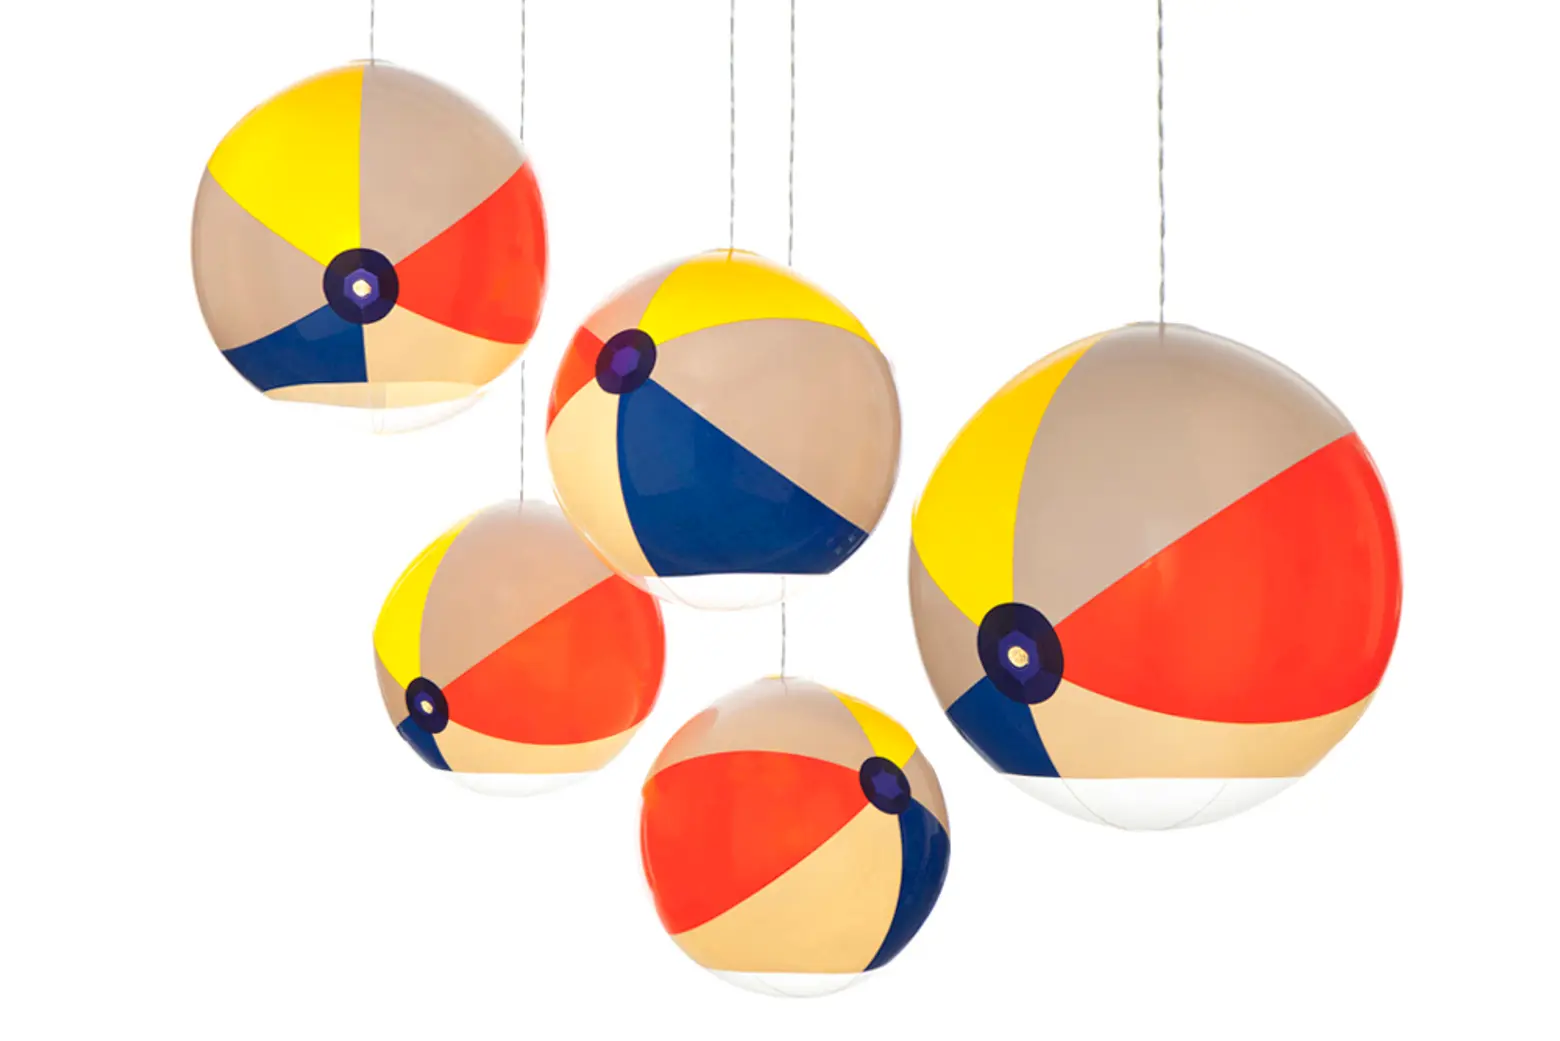 Light Up Your Home With These Summer-Ready Beach Ball Lights by Toby Sanders